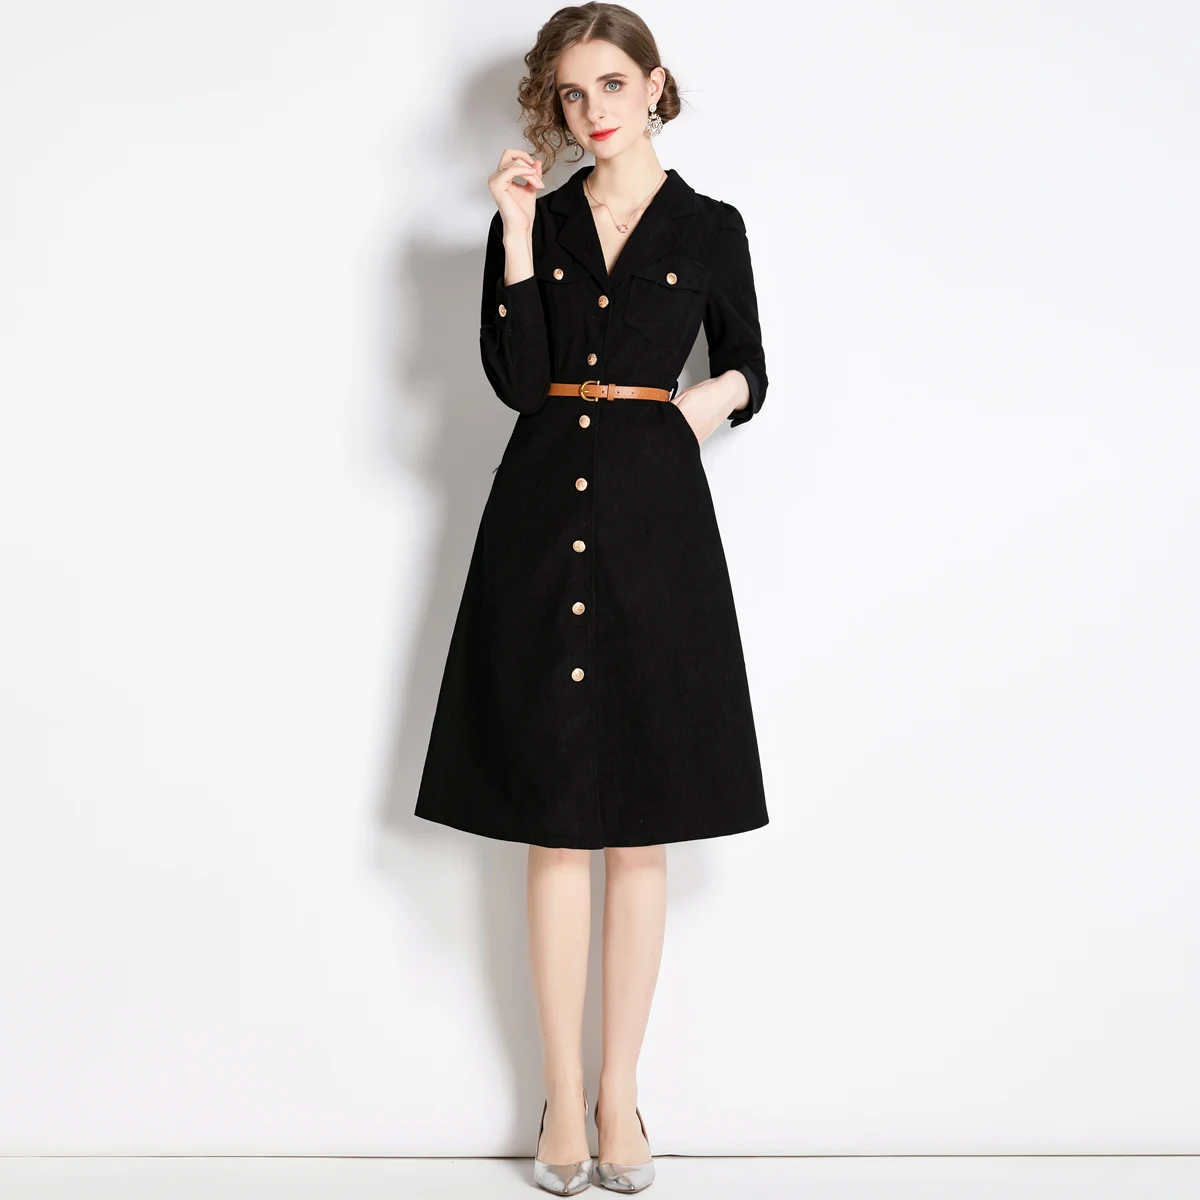 Autumn and winter retro corduroy dress Women's V-neck metal button single-breasted dress